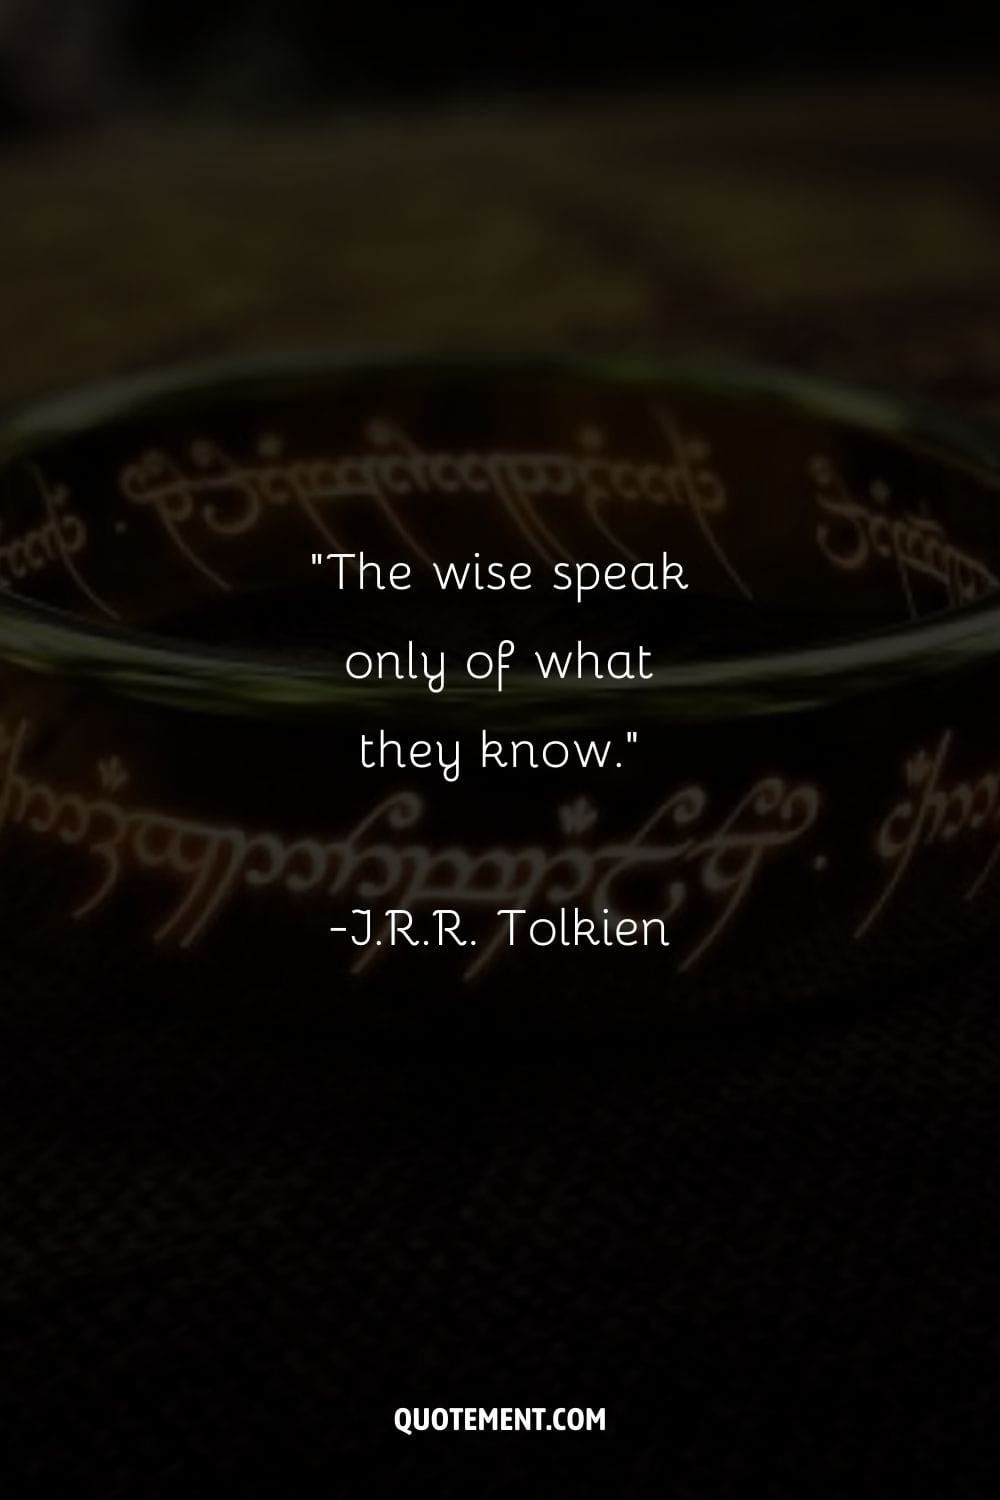 The wise speak only of what they know